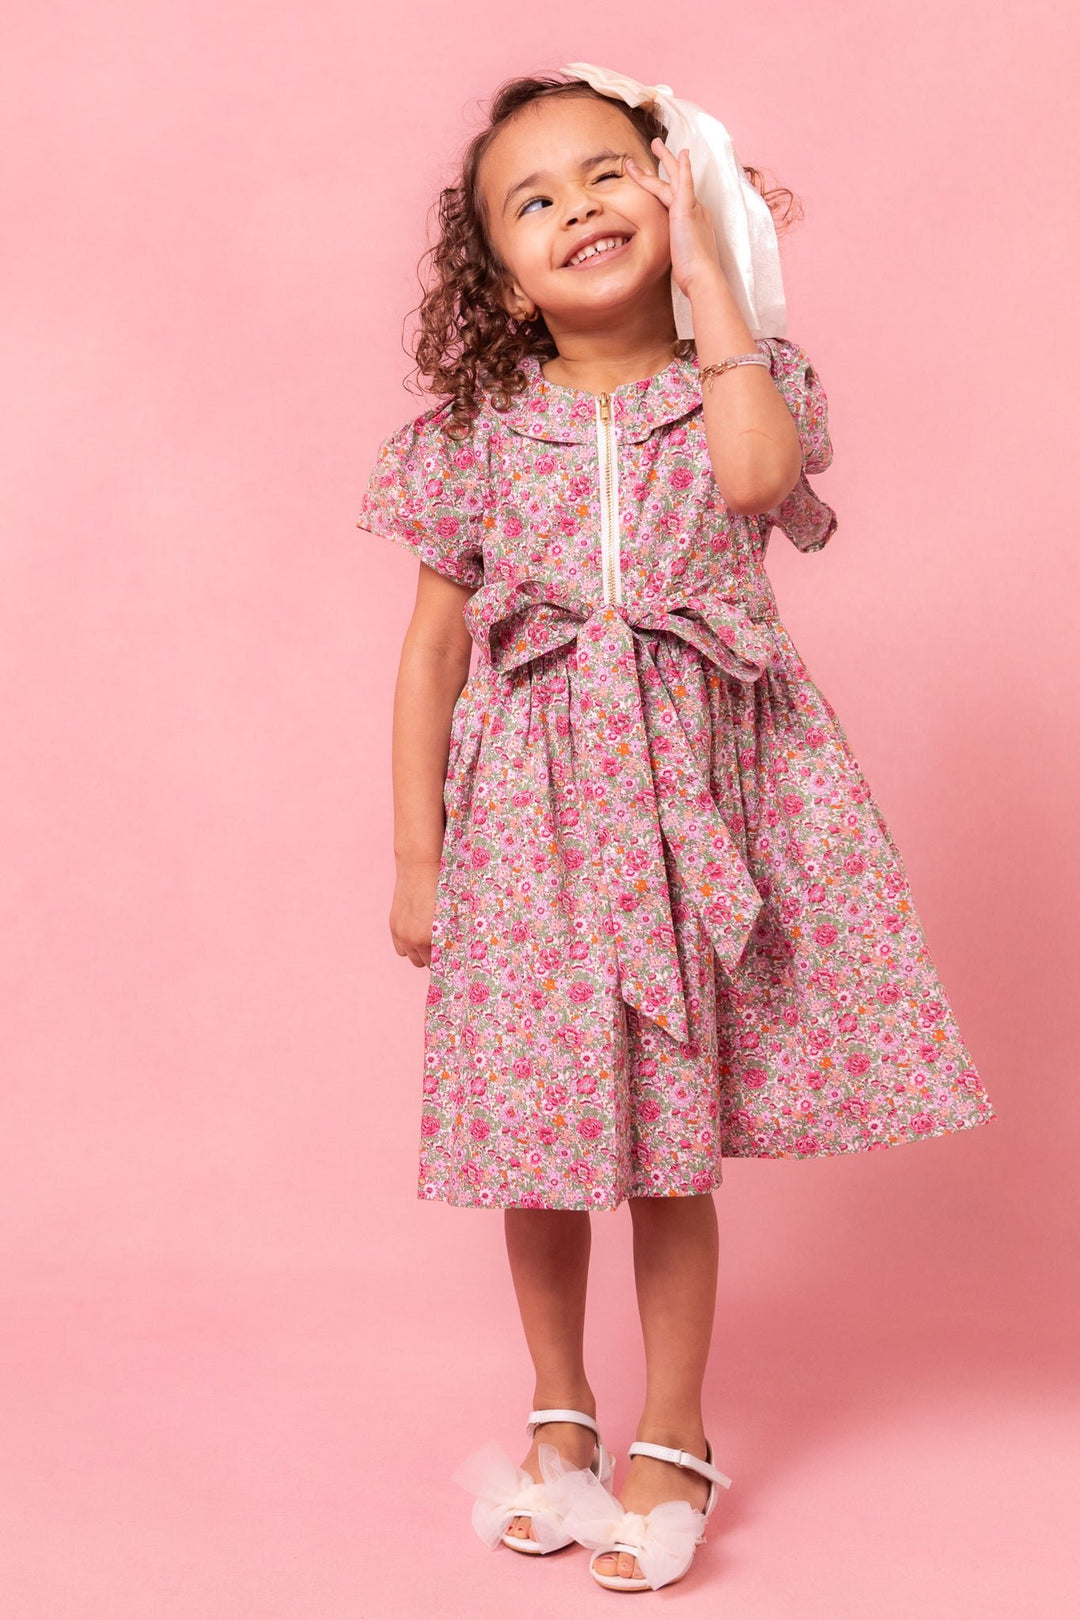 Mini Chelsea Dress Made With Liberty Fabric - FINAL SALE